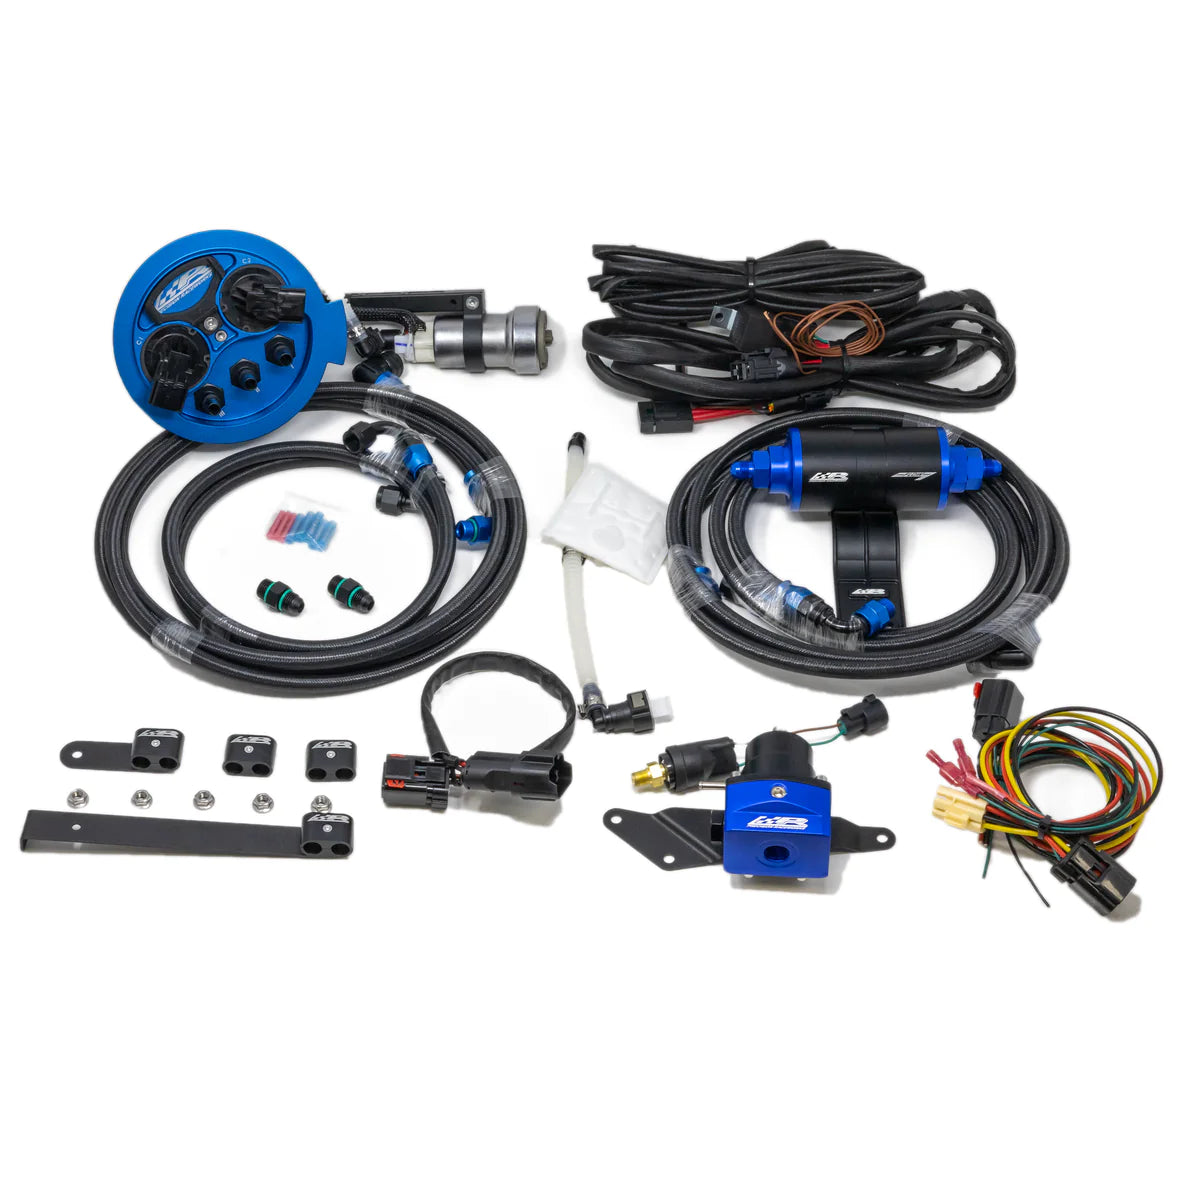 Precision Raceworks - Stand Alone Auxiliary Fuel System || G8x/G2x